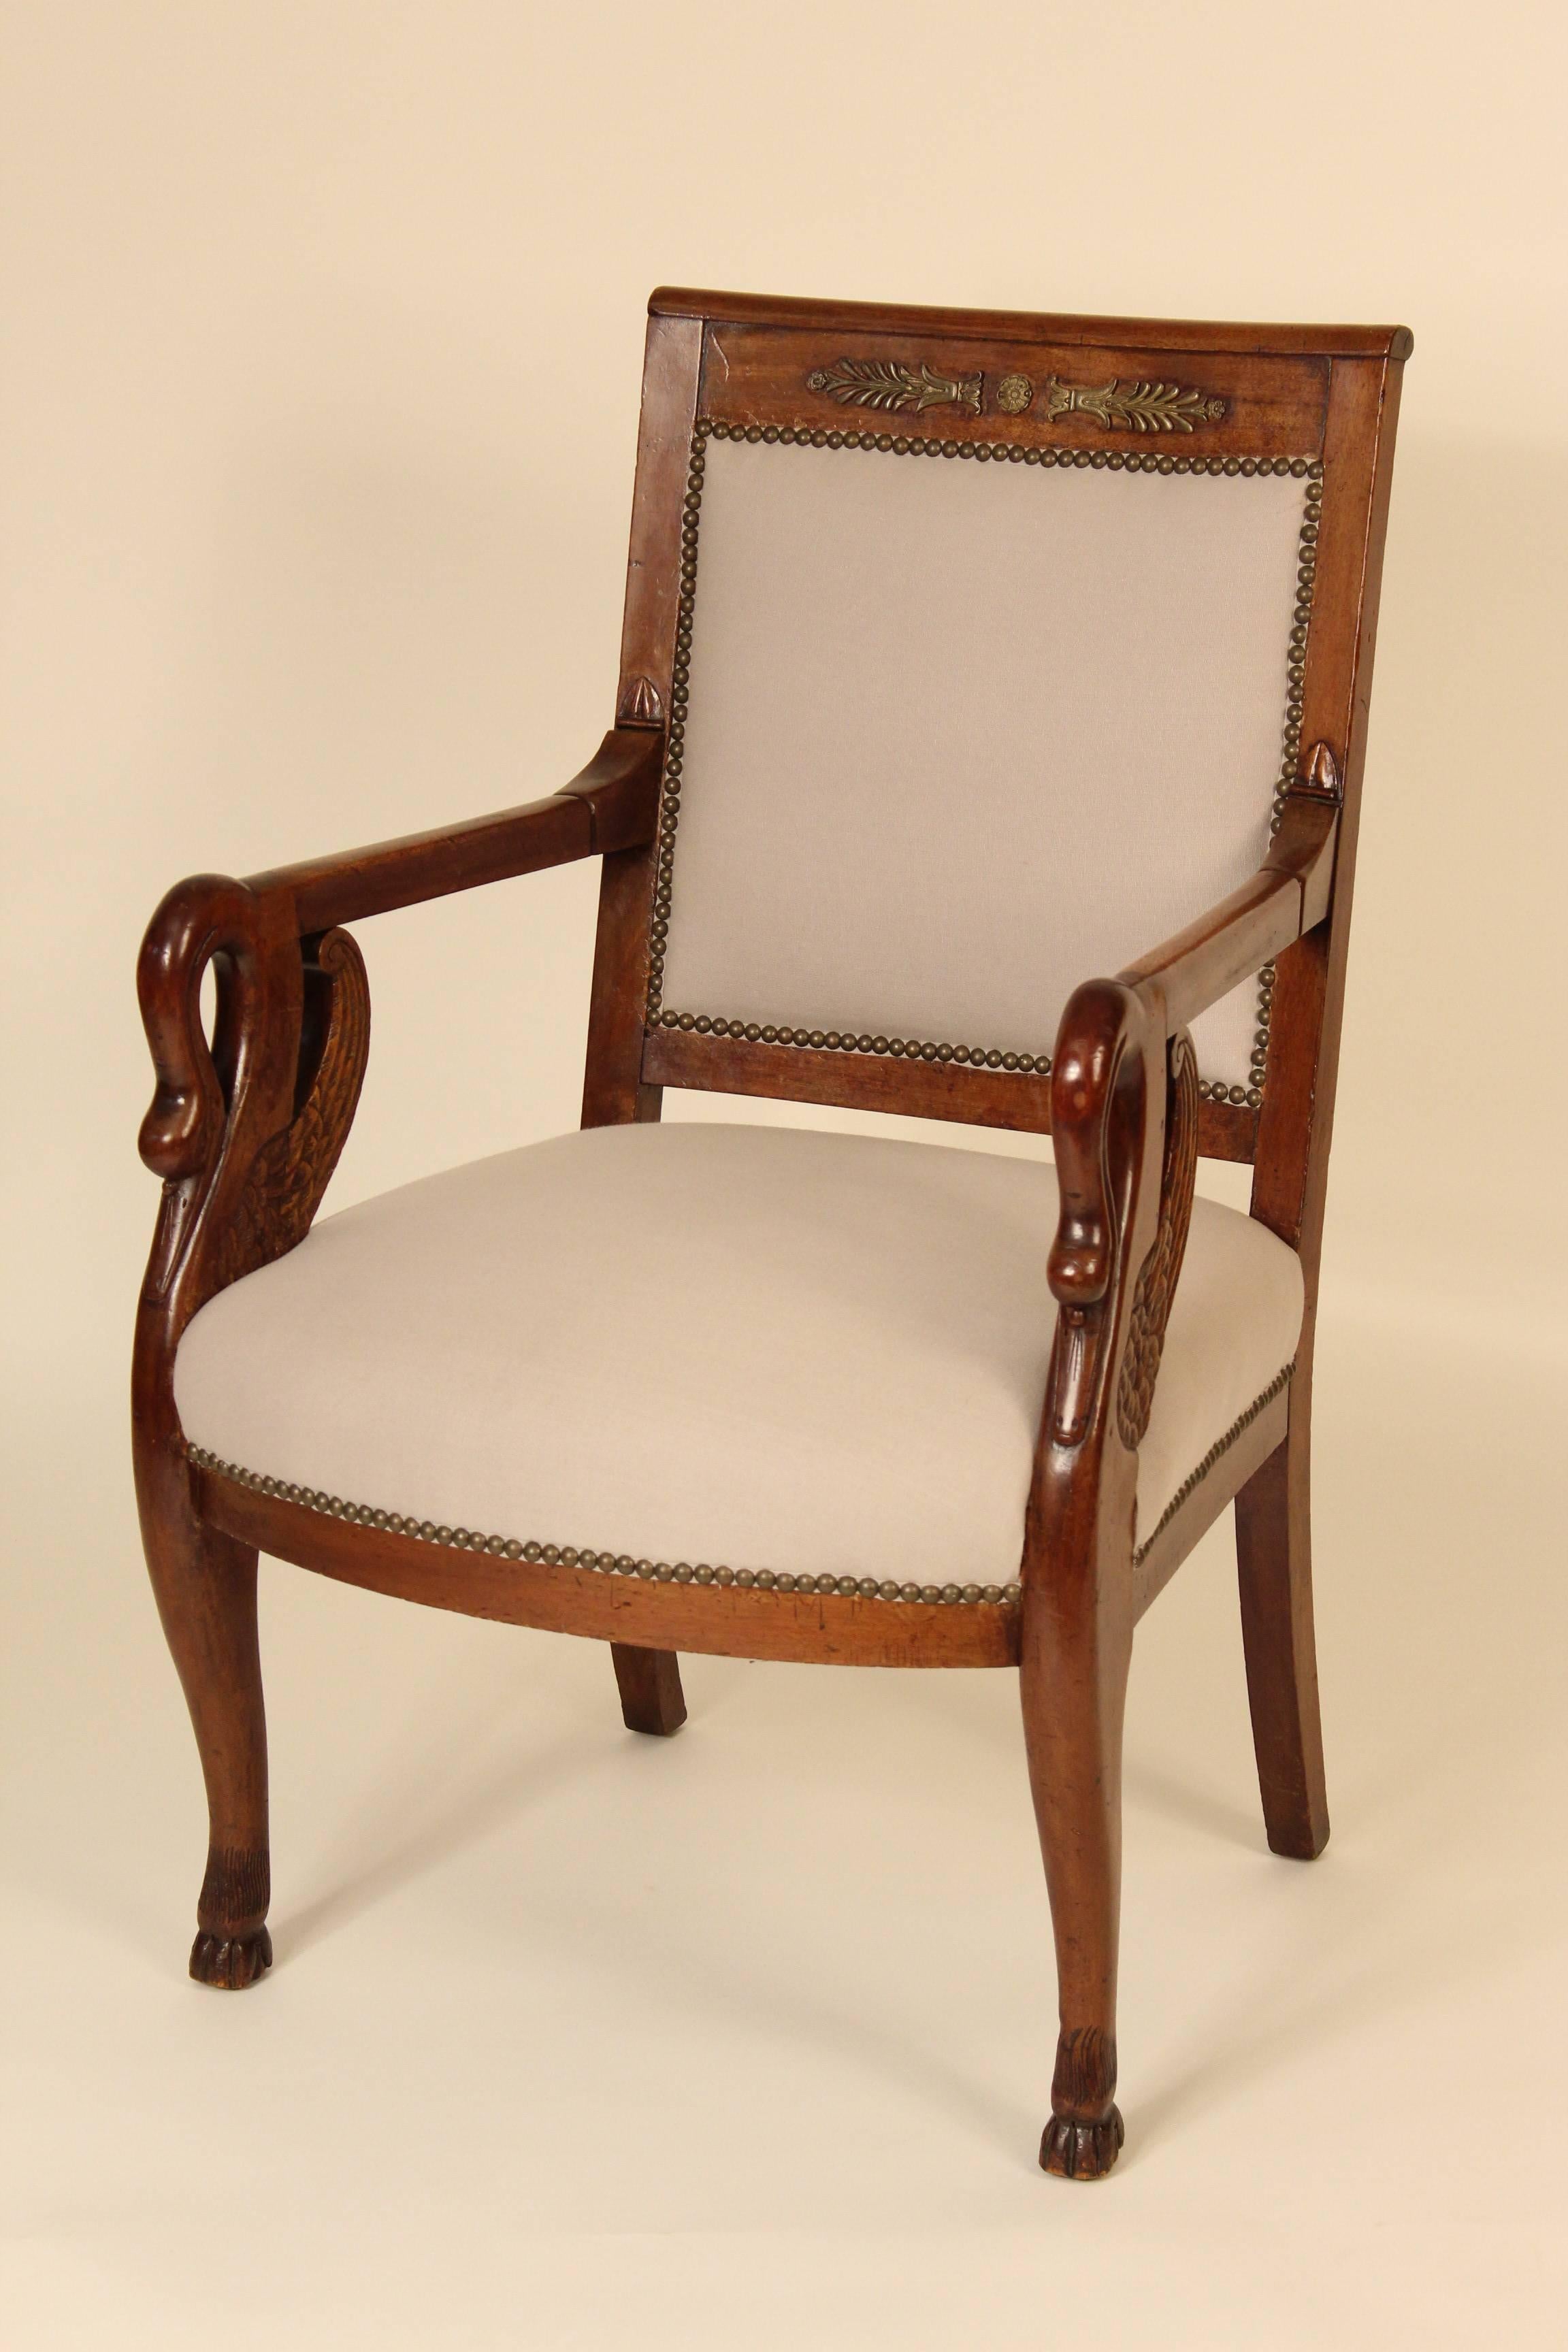 Pair of mahogany Empire style armchairs with swan carved arm supports and bronze mounts on crest rails, circa 1910. Both chairs were recently upholstered.